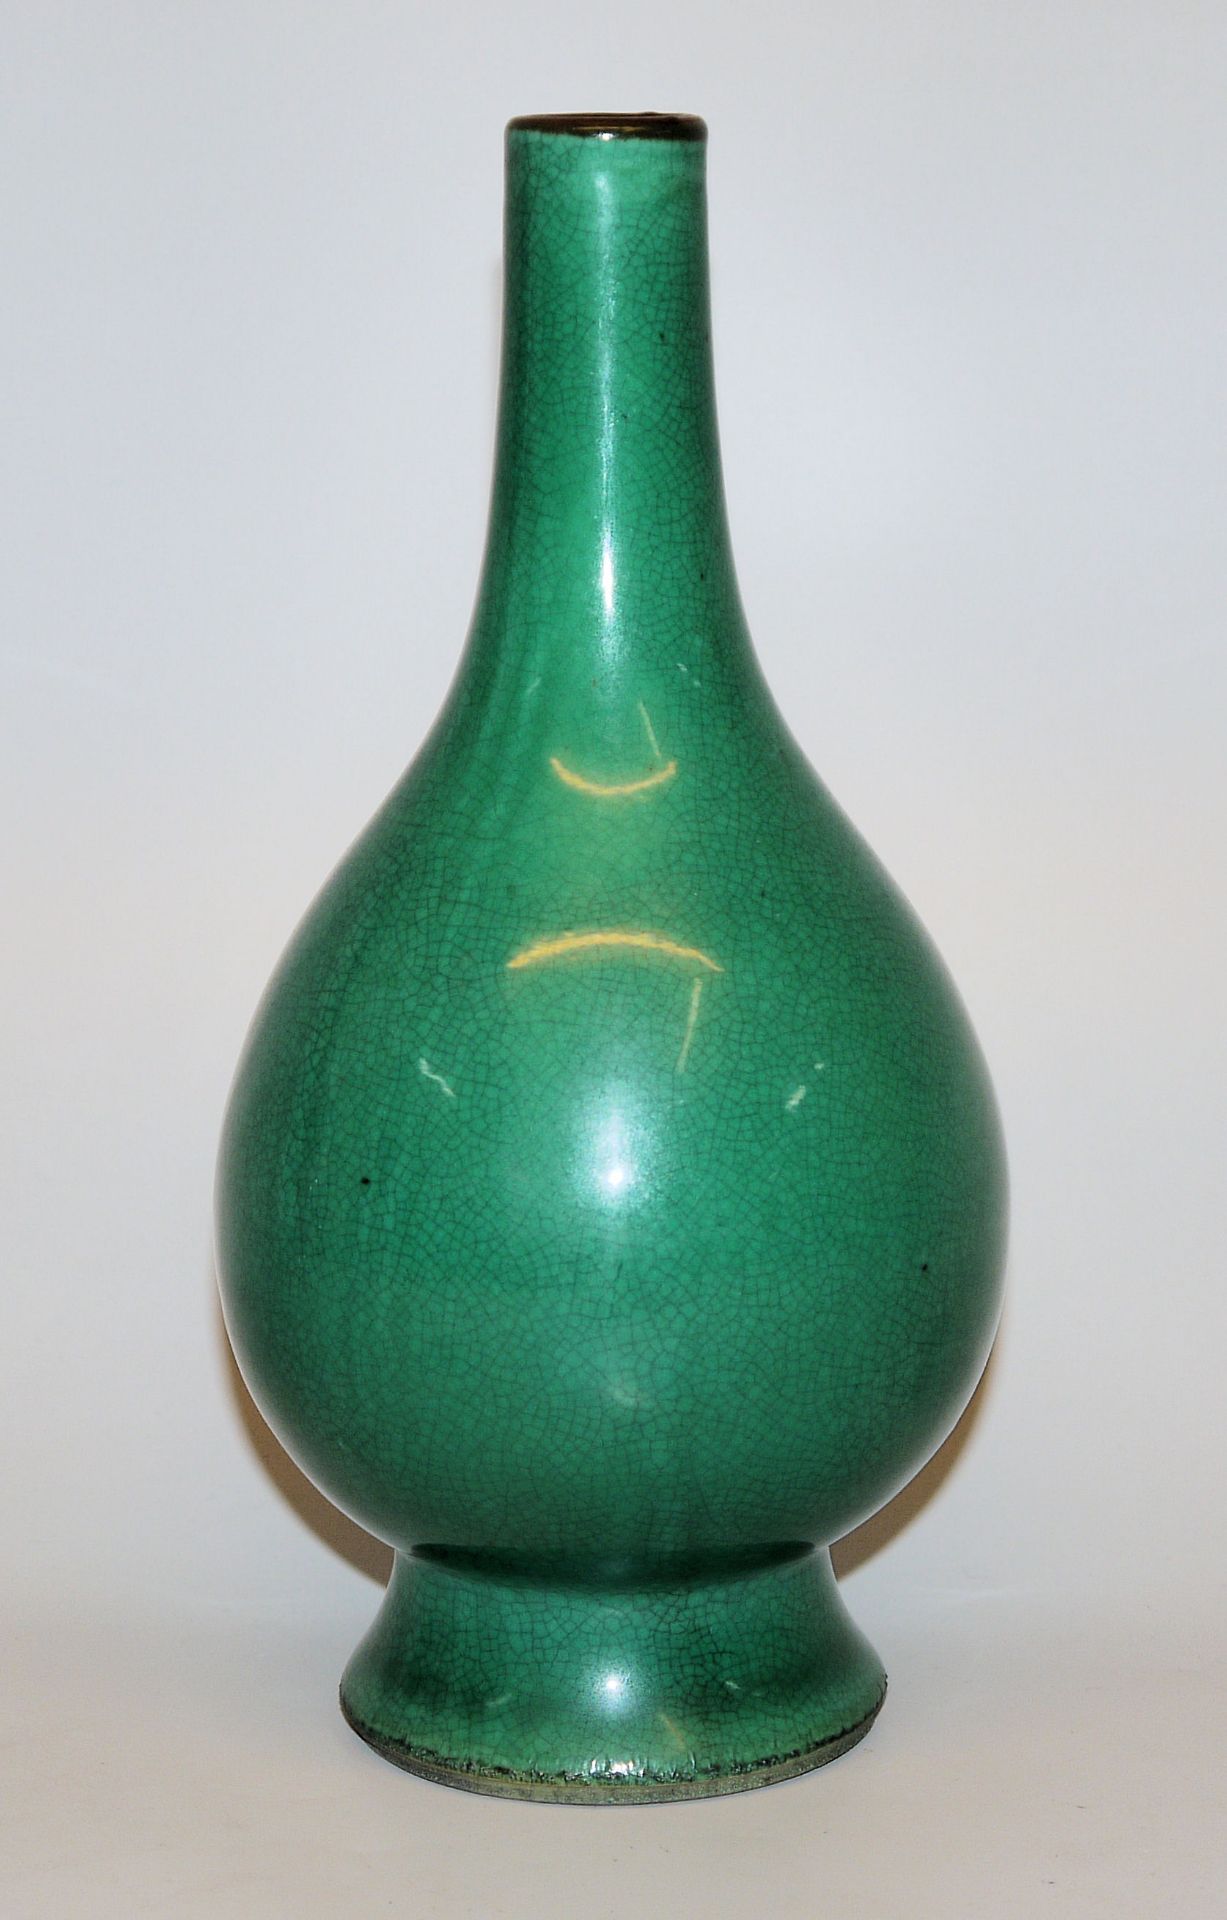 Bottle vase with apple-green glaze, late Qing period, China 19th century